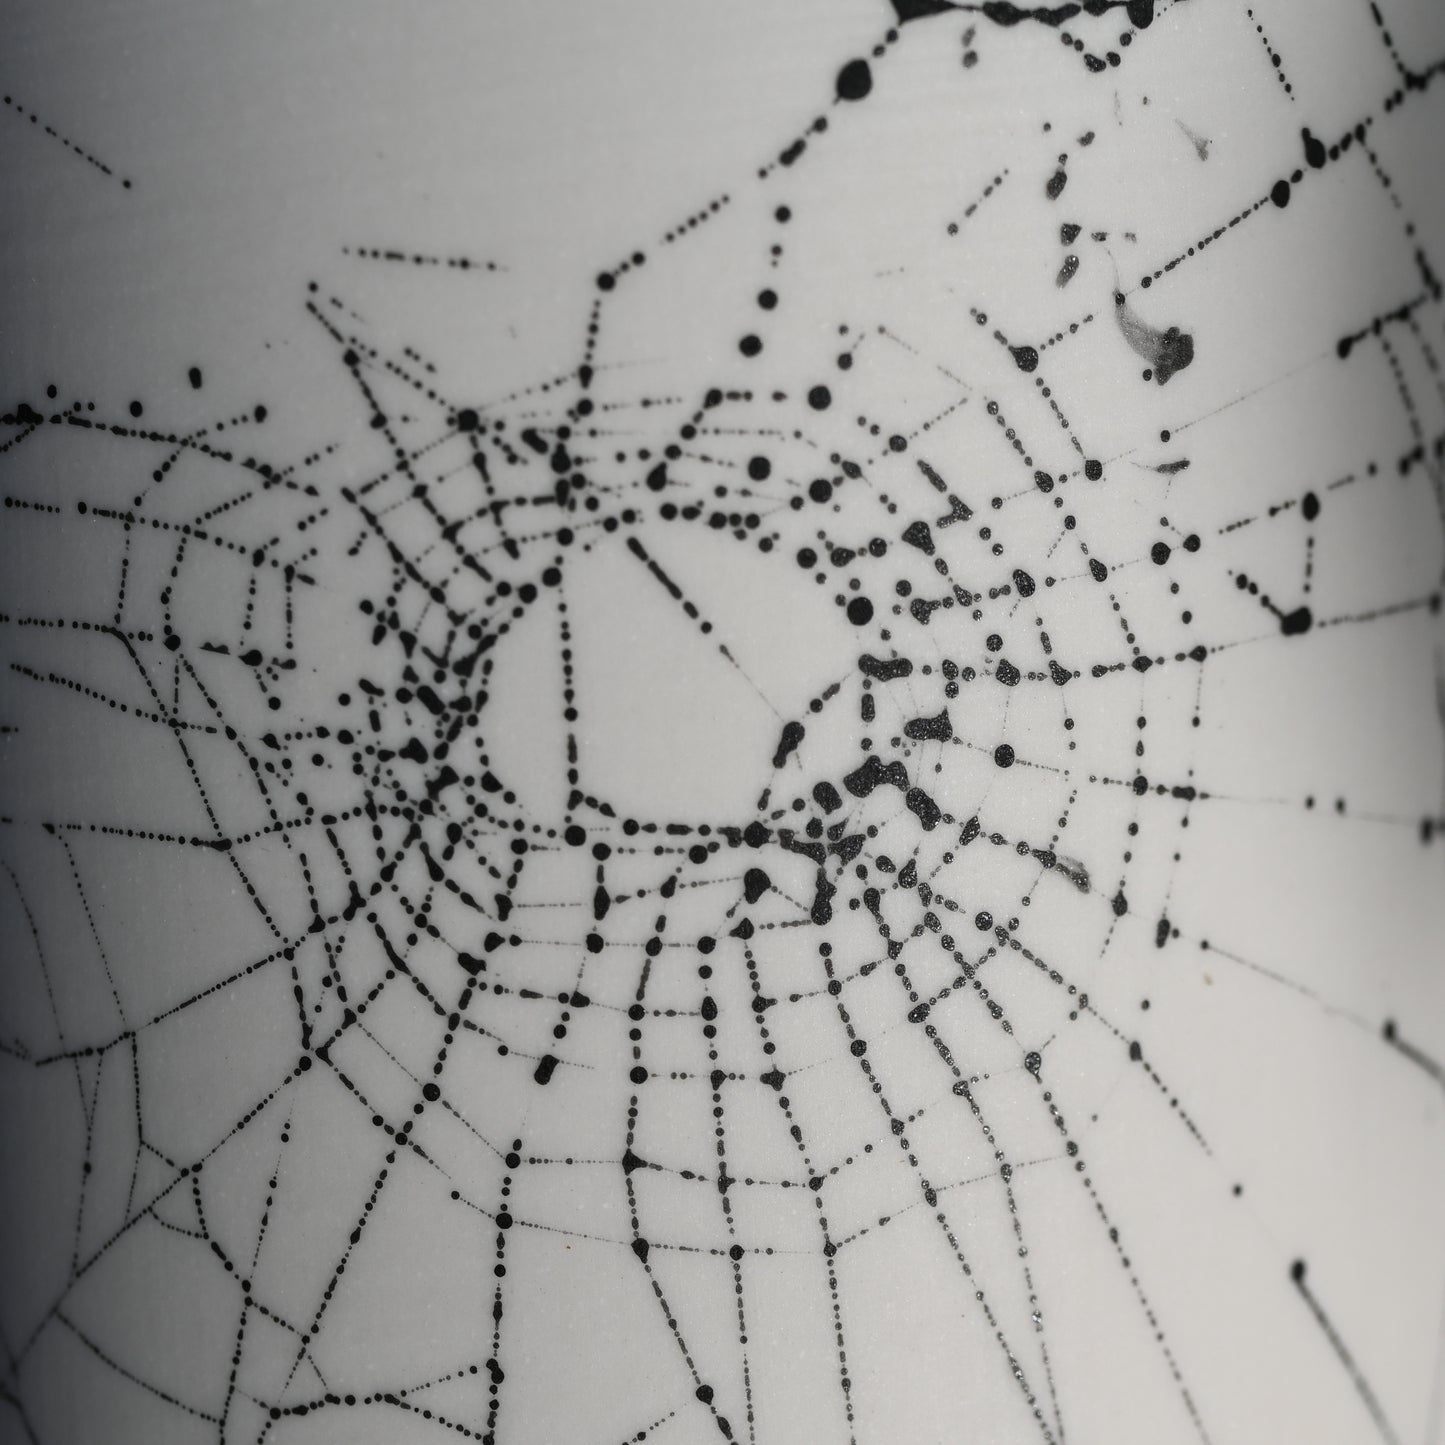 Web on Clay (081), Collected September 05, 2022